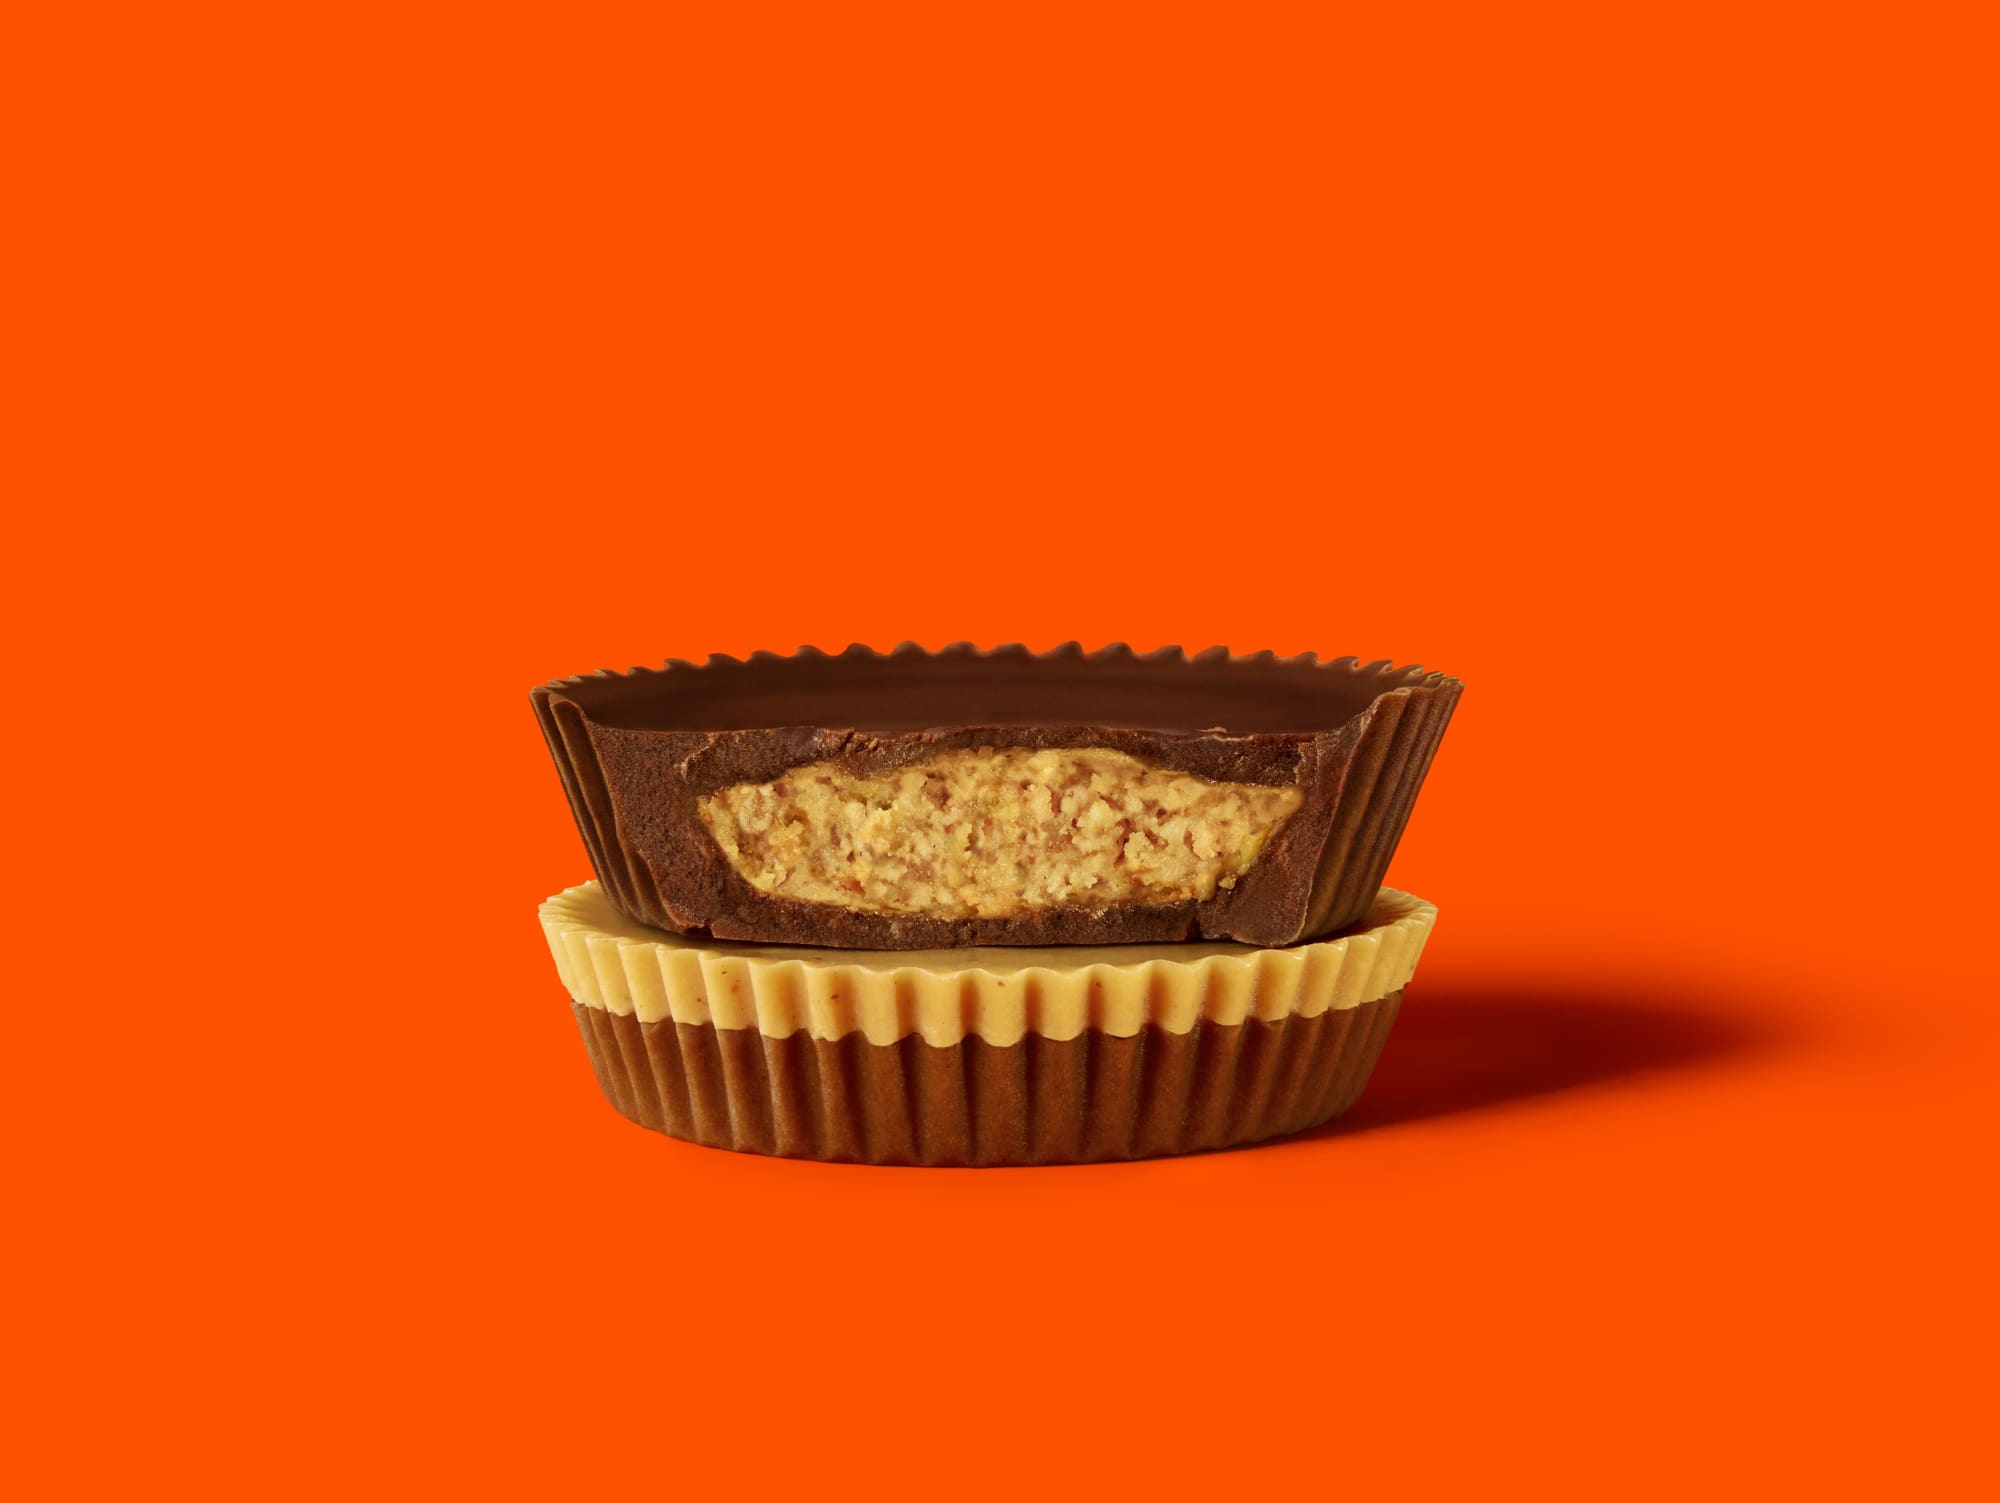 Reese’s Lovers Miniatures are here and we’re not sorry to enjoy them